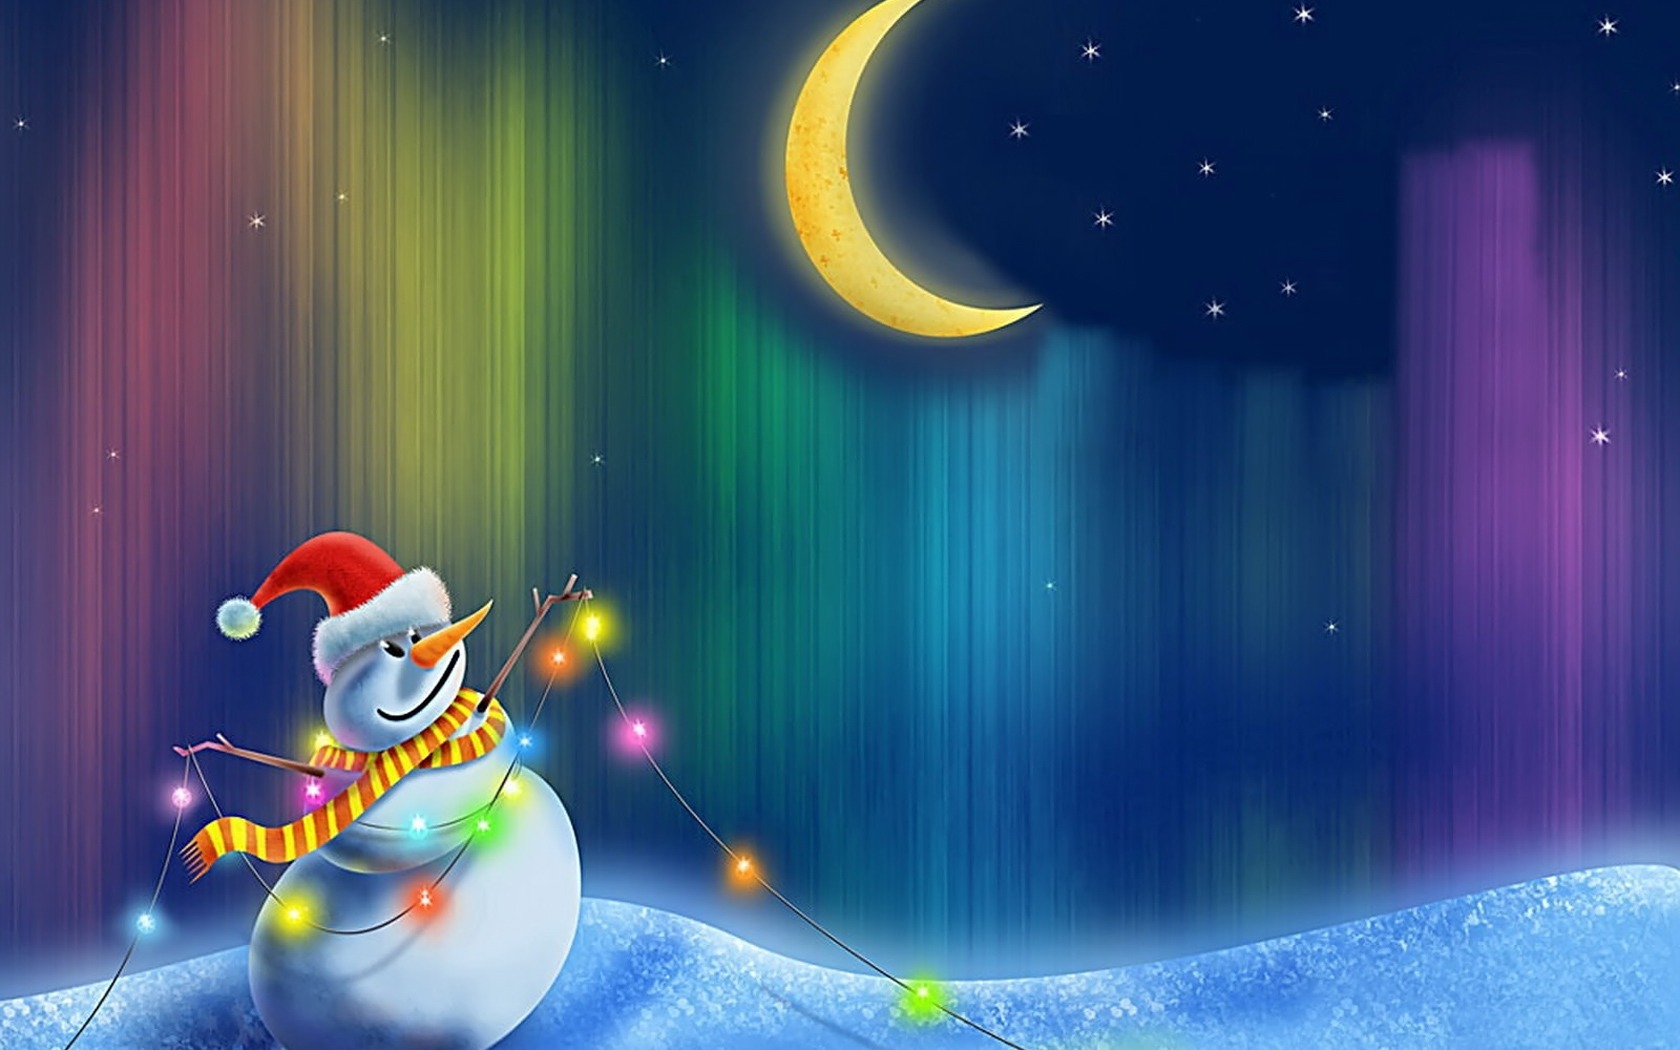 Merry Christmas Wallpaper With